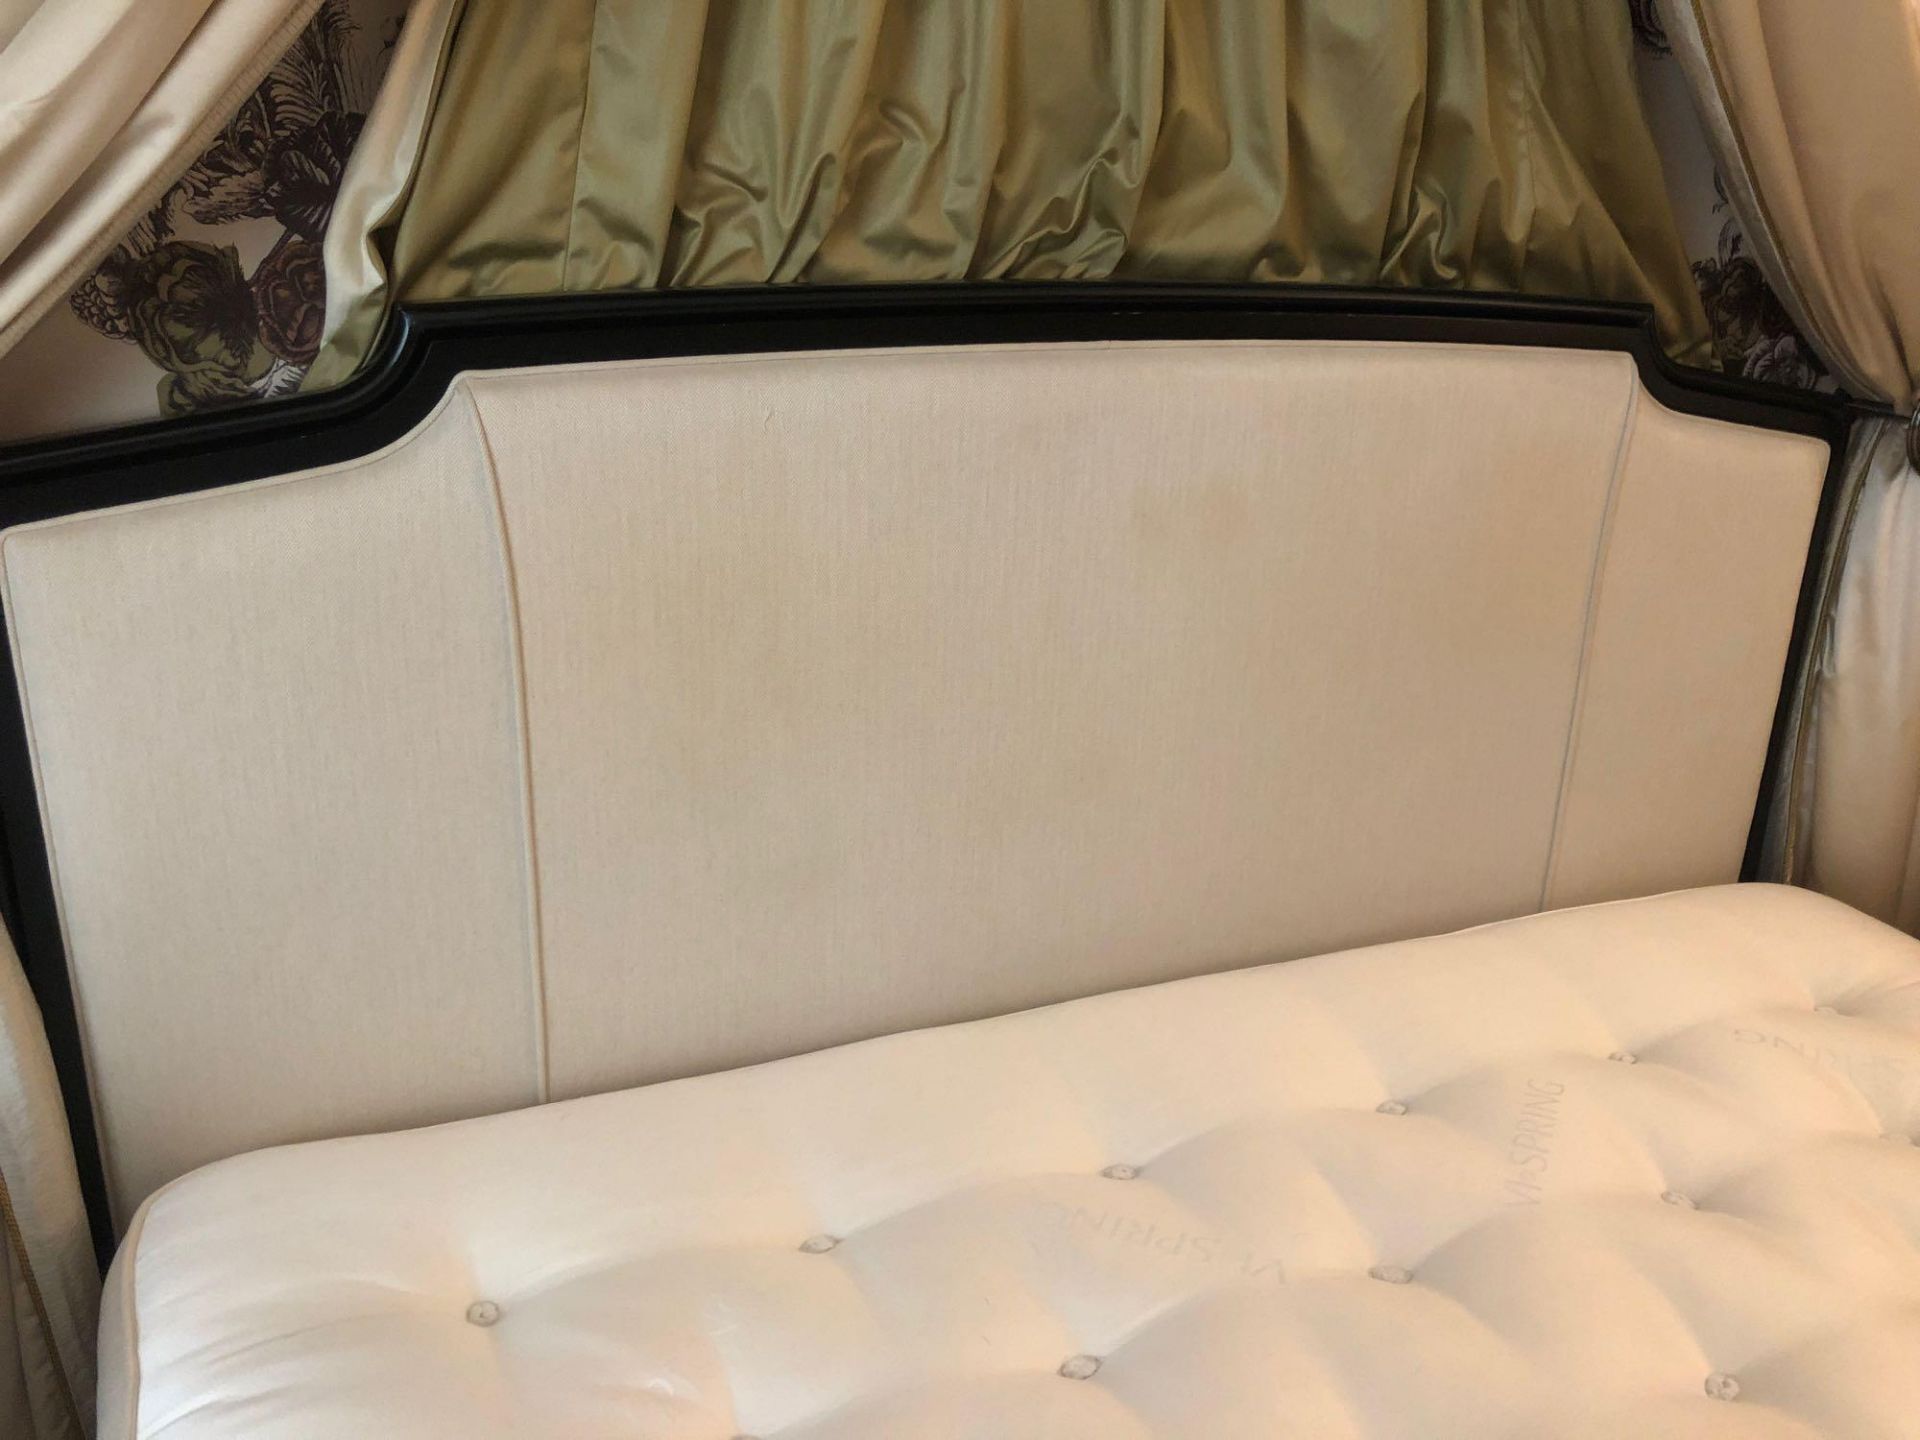 Headboard, Handcrafted With Nail Trim And Padded Textured Woven Upholstery Complete With Coronet - Bild 2 aus 4